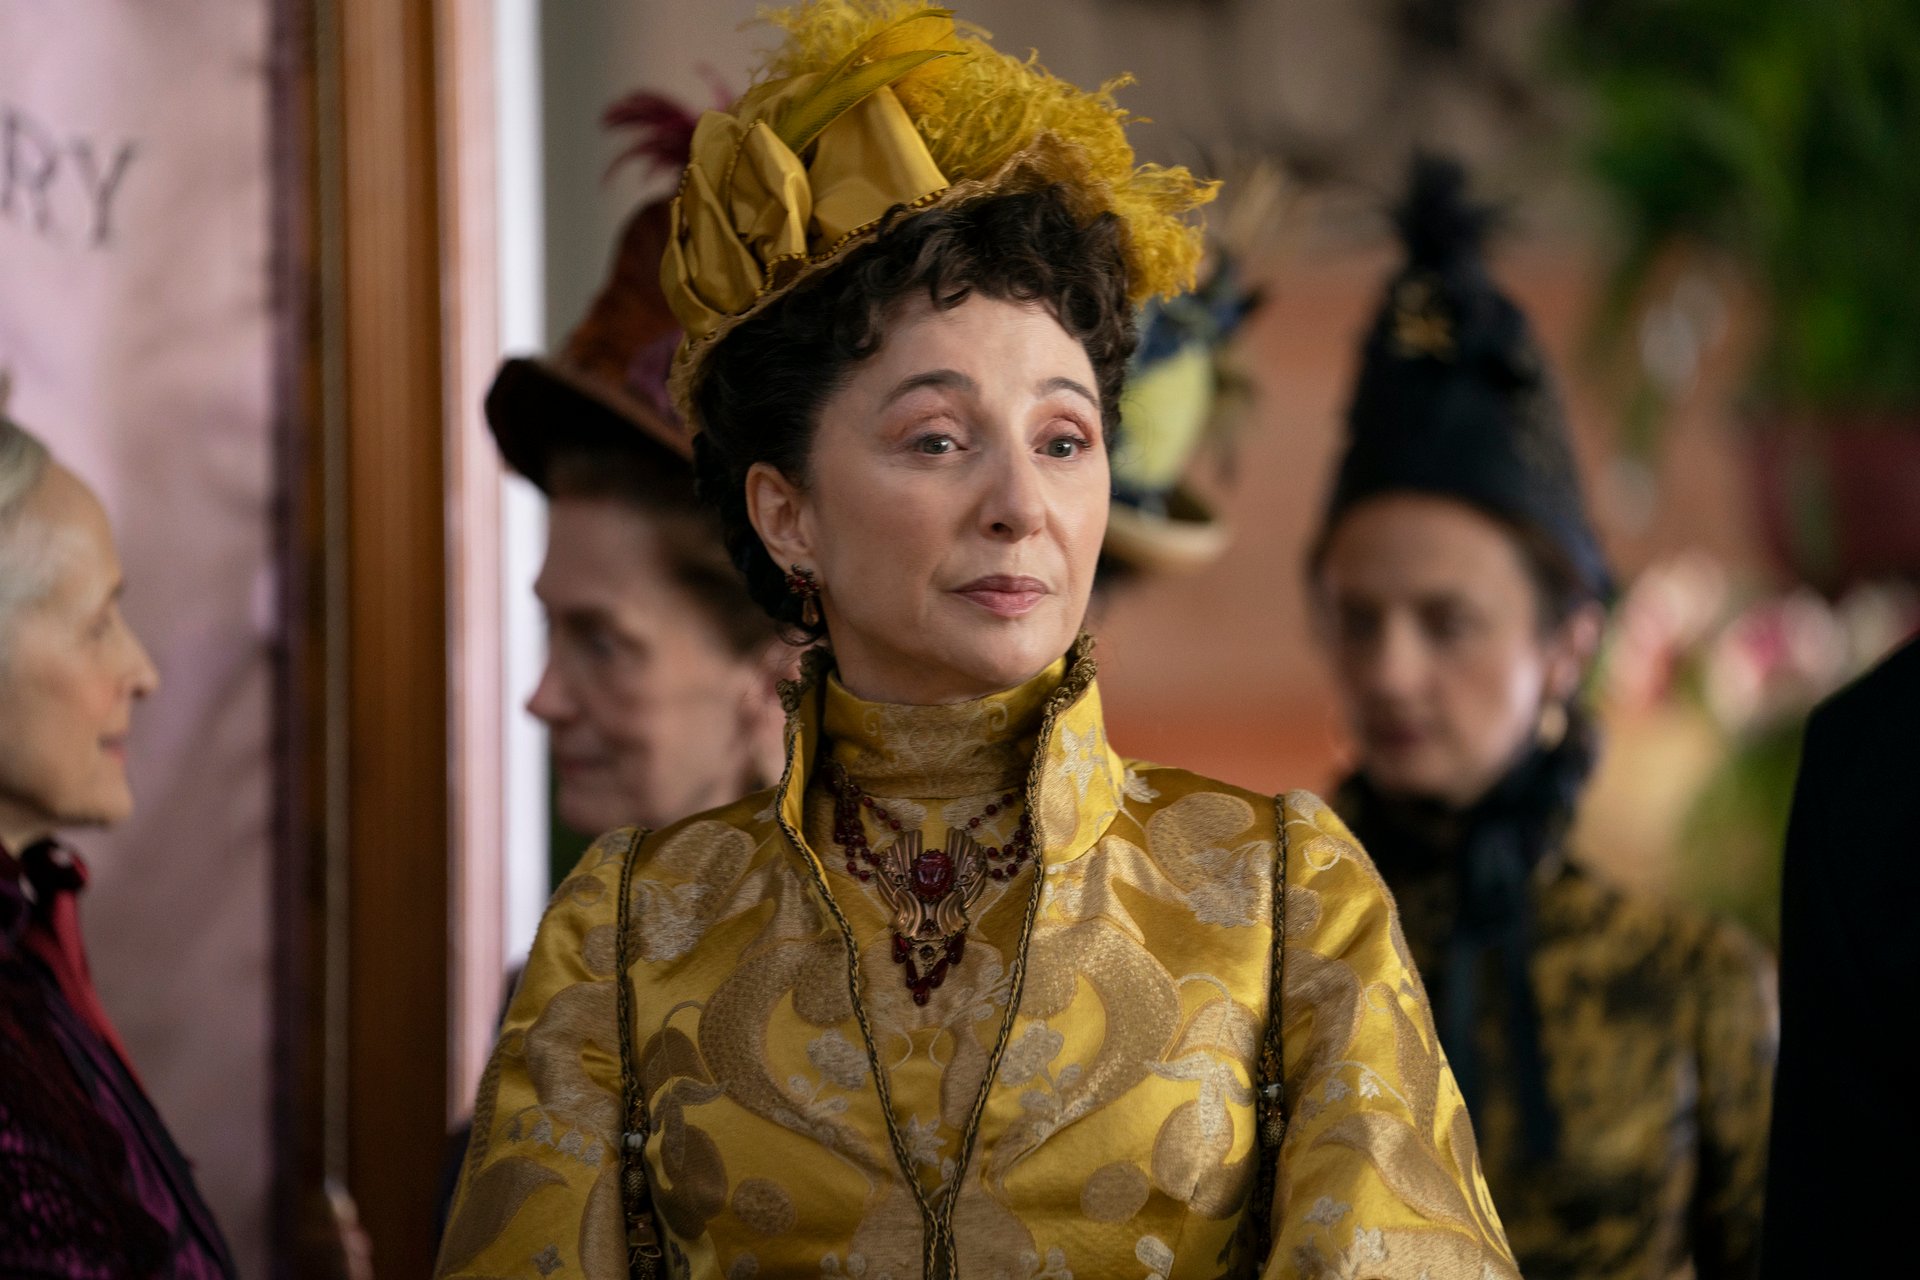 Donna Murphy as Mrs Astor, wearing a yellow gown and hat, in 'The Gilded Age'